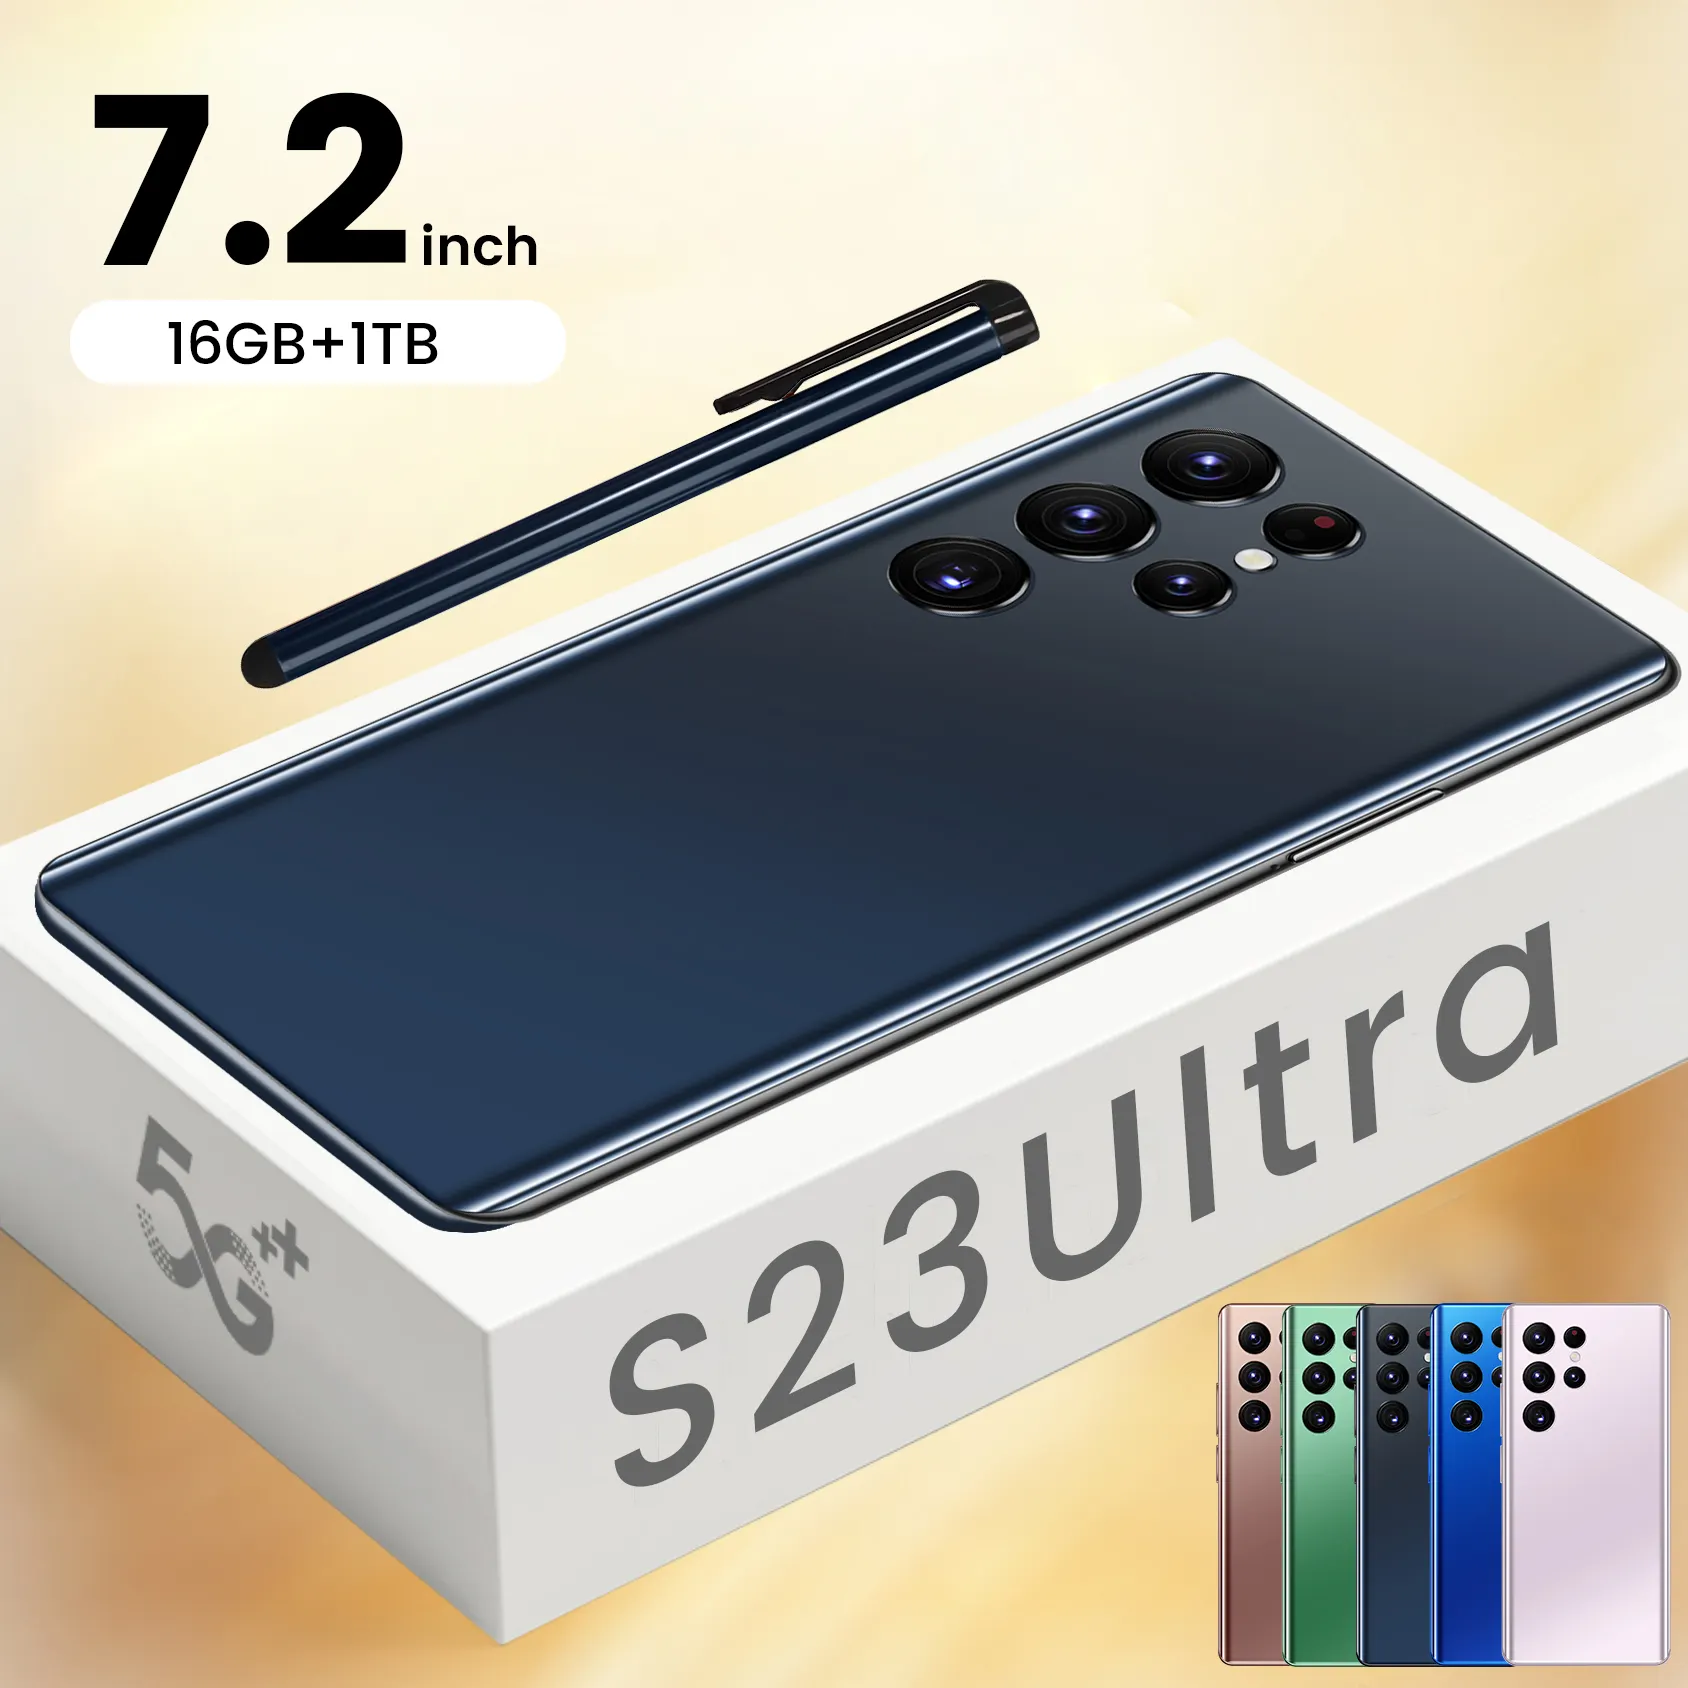 Hot Selling S23 ULTRA 16GB+1TB 72MP+108MP 7.2 Inch 5G Mobile Smartphone Big Battery Android Cell Phone